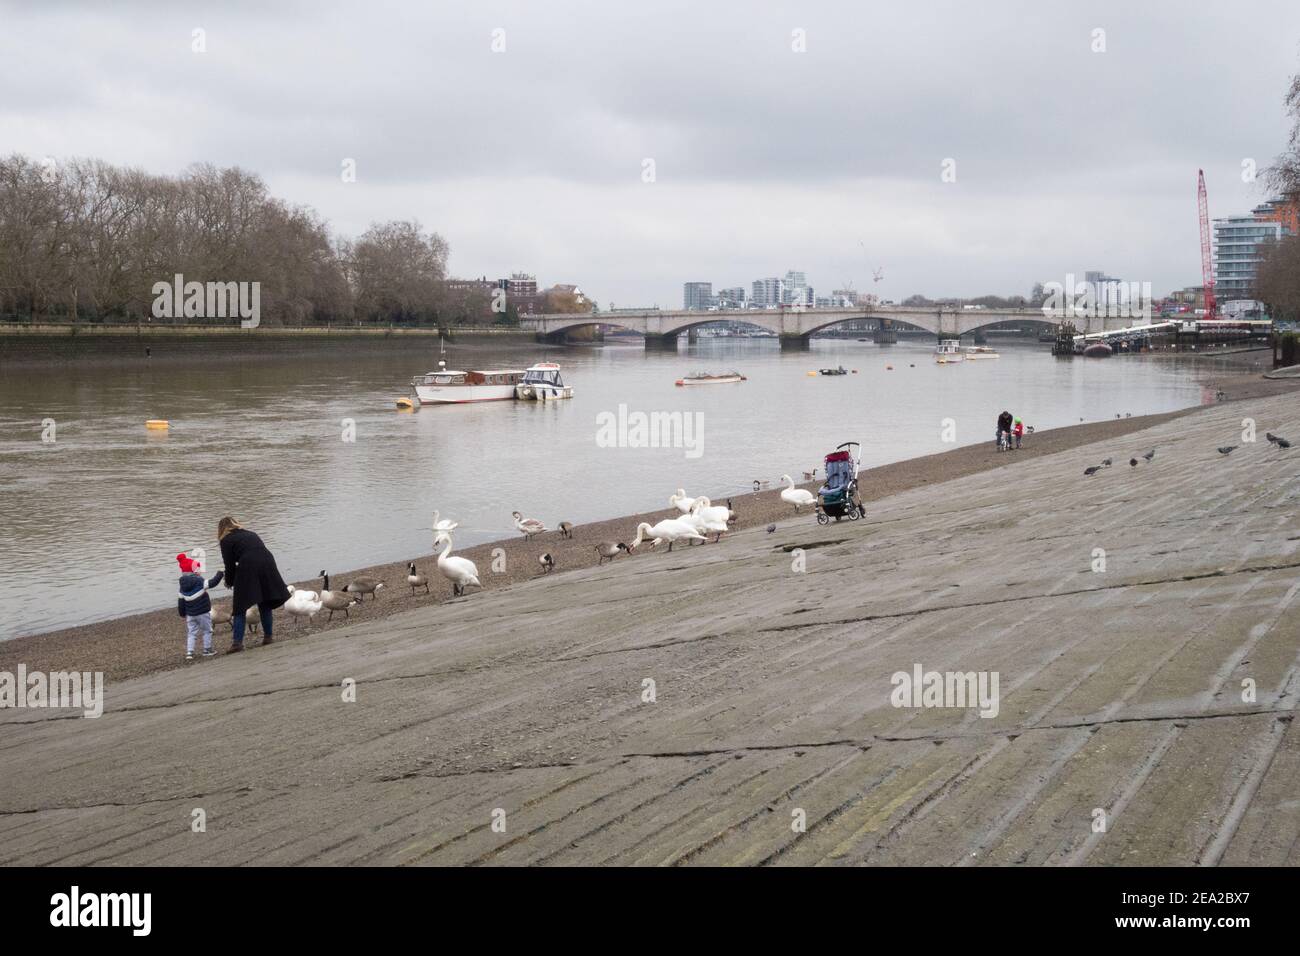 A mother and child on Putney slipway next to the River Thames in London, U.K. Stock Photo